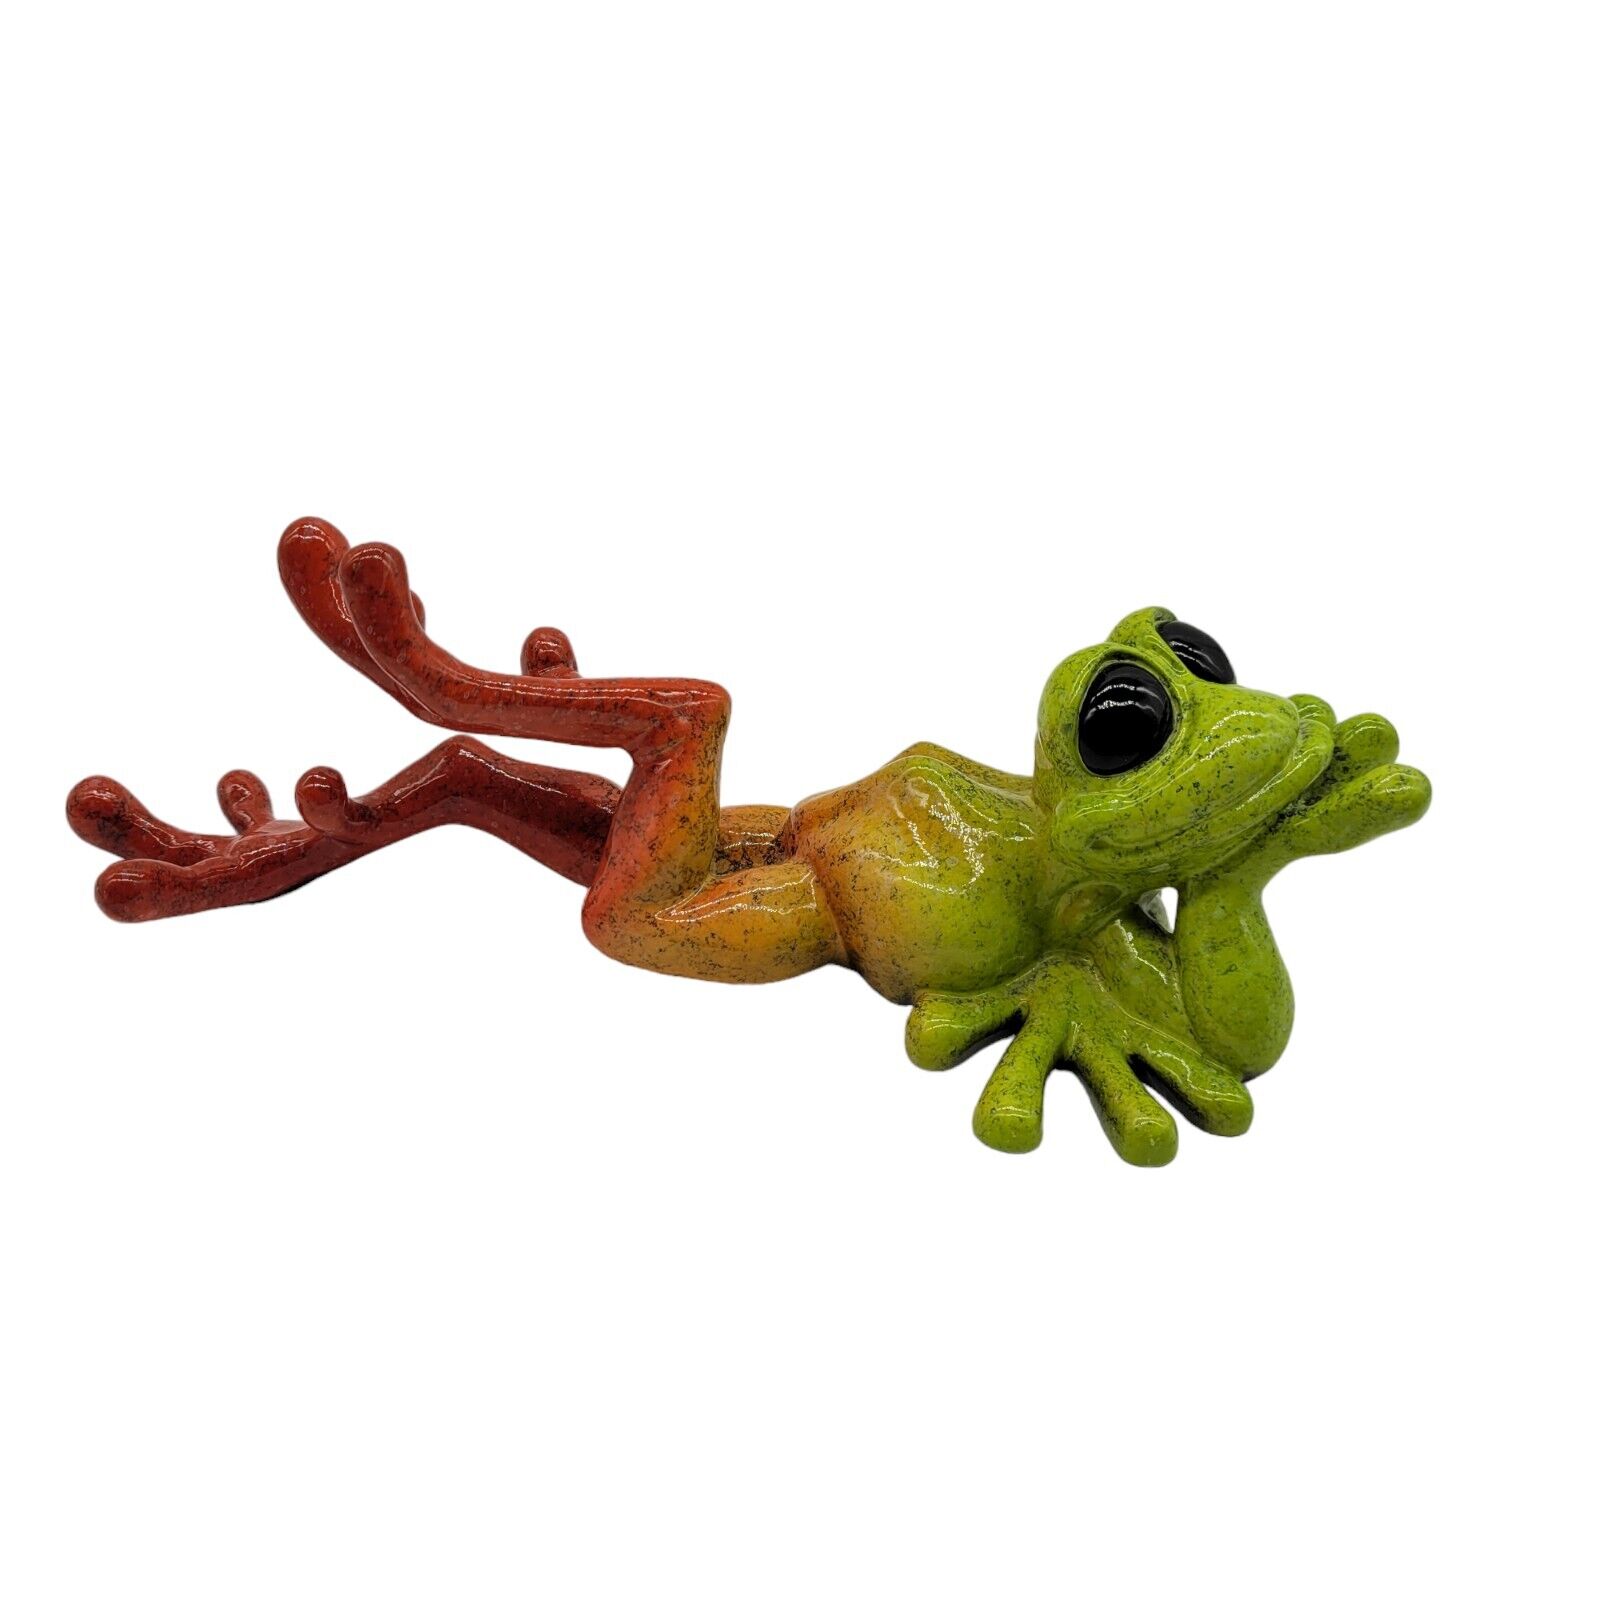 Kitty\'s Critters DayDreams Frog Whimsical Sculpture tree Frog 2006 Retired 